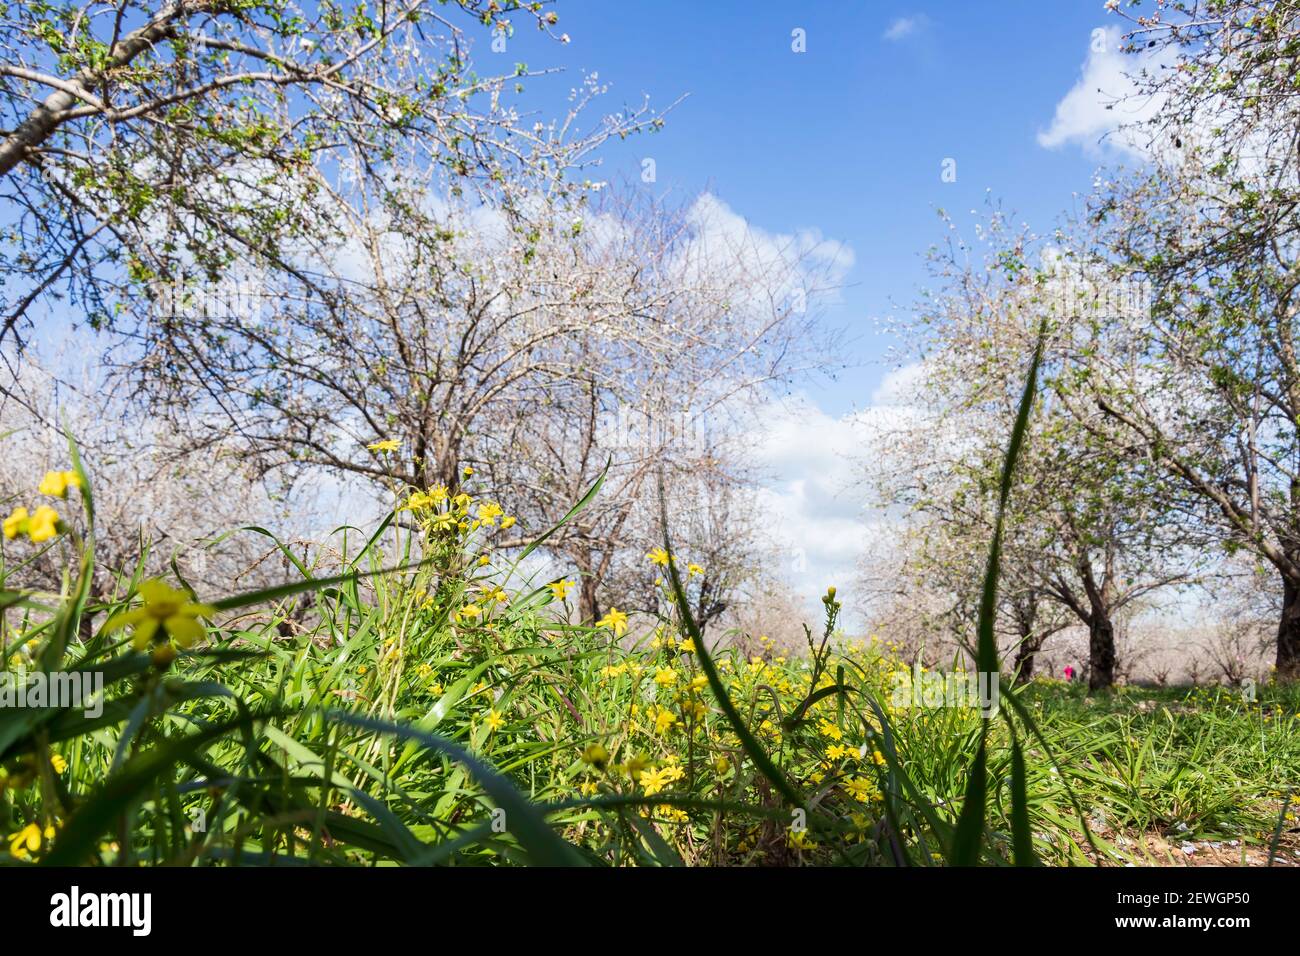 Yellow flowers between rows of flowering almond trees in an orchard against a sky with clouds Stock Photo